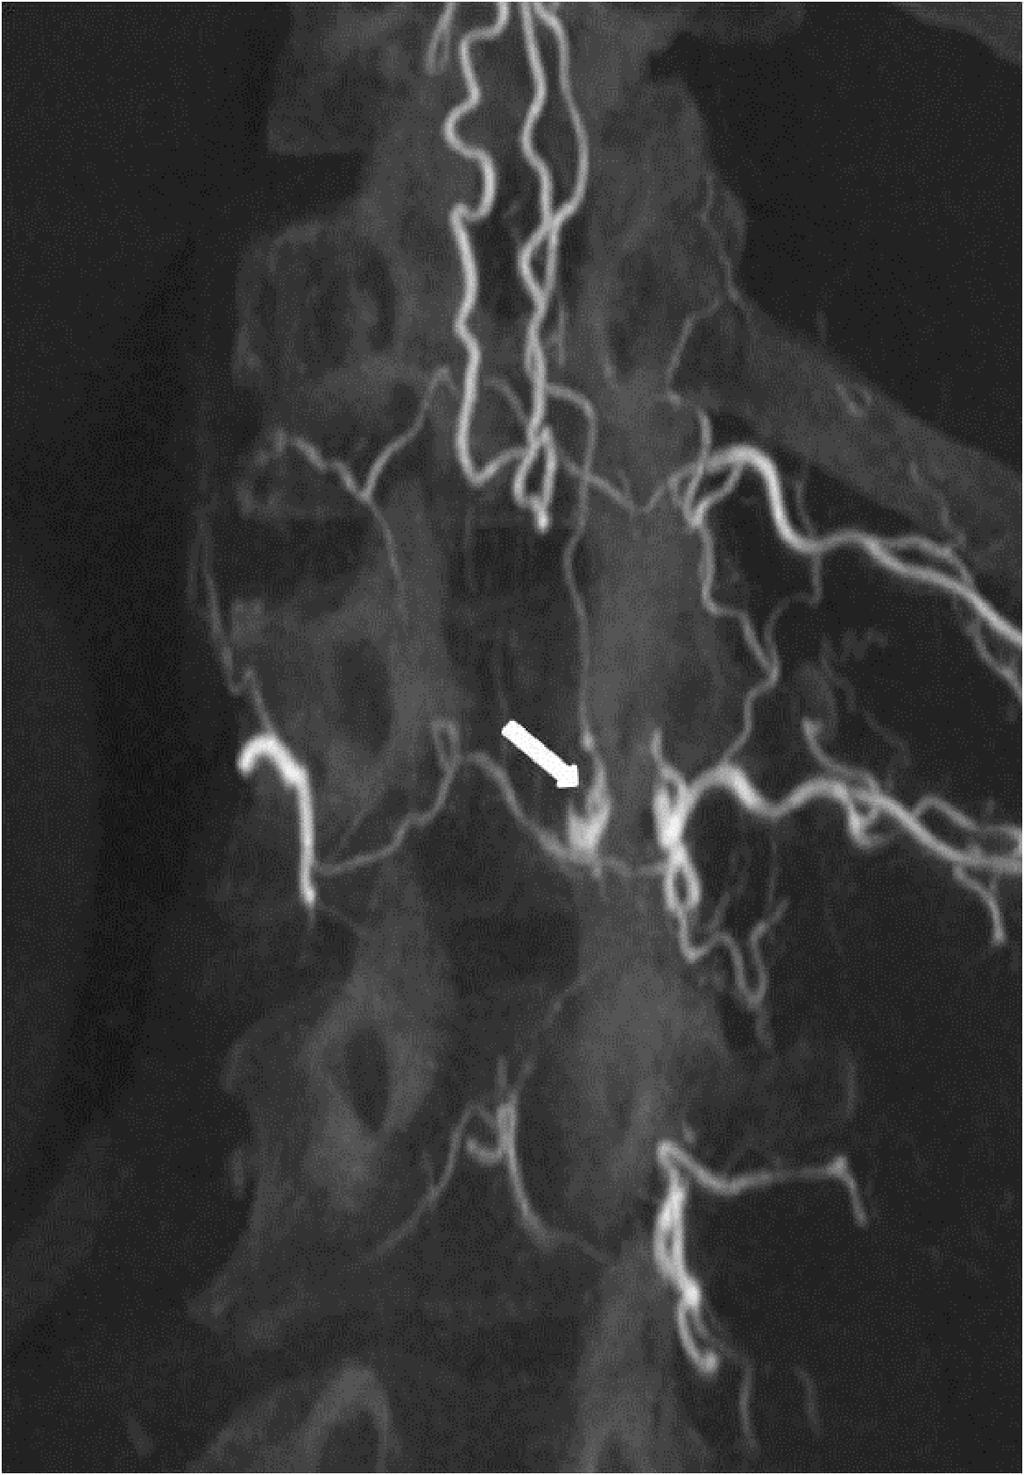 Spinal dural AVF demonstrated on the conventional DSA. The arrow points to the fistula.